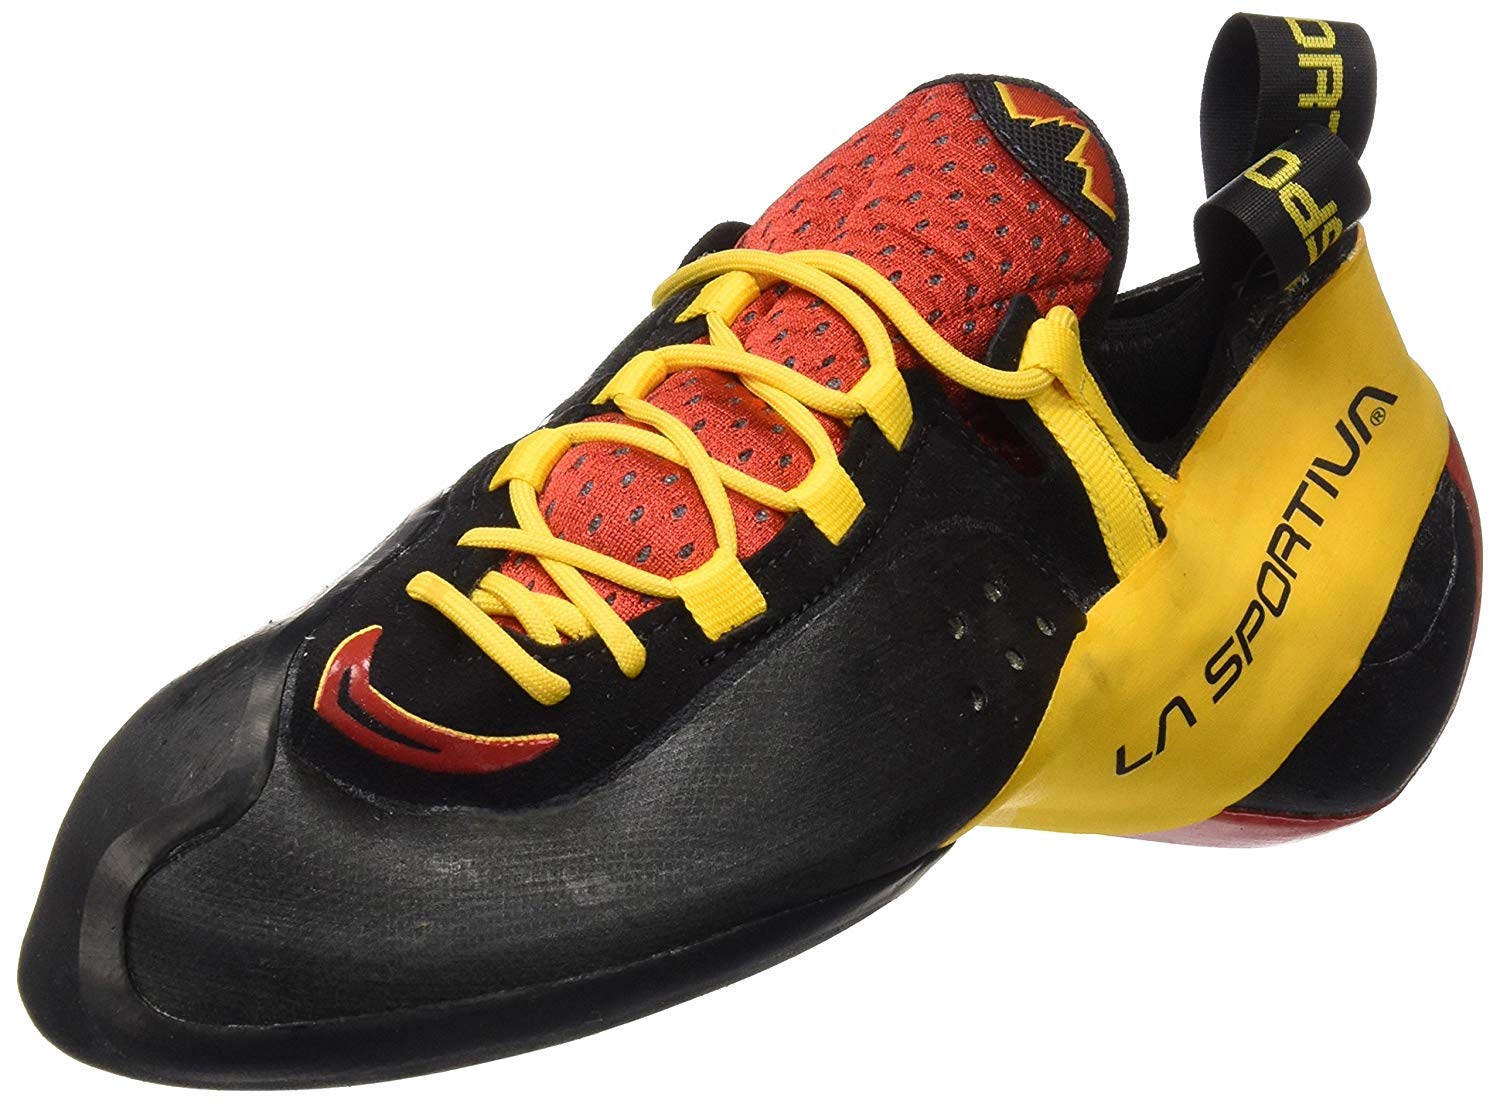 Best Climbing Shoes of 2020|The 